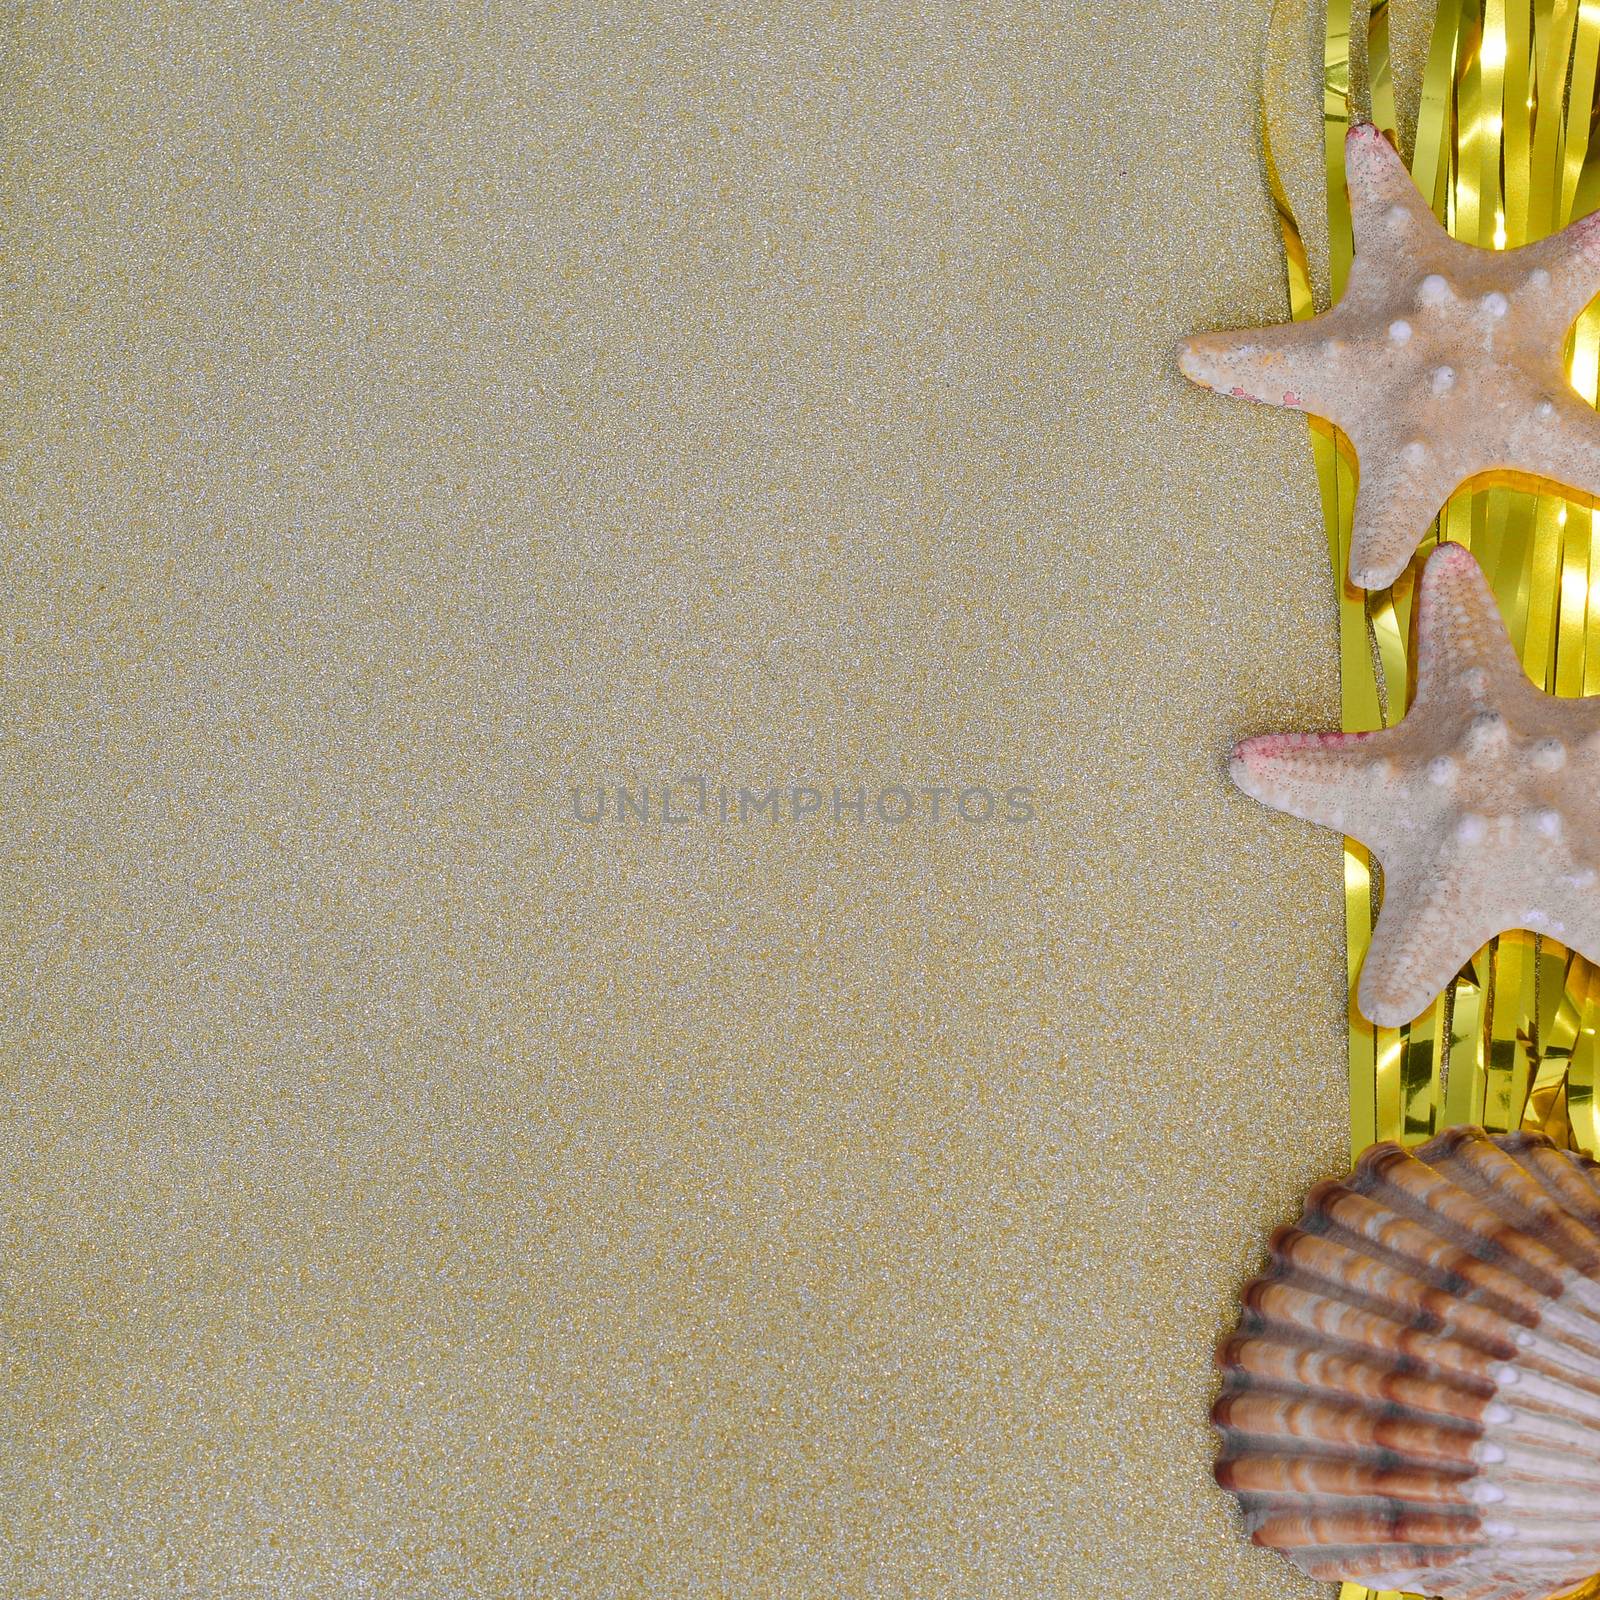 Christmas decorations and Christmas toys combined with sea stars and shells by alexandr_sorokin